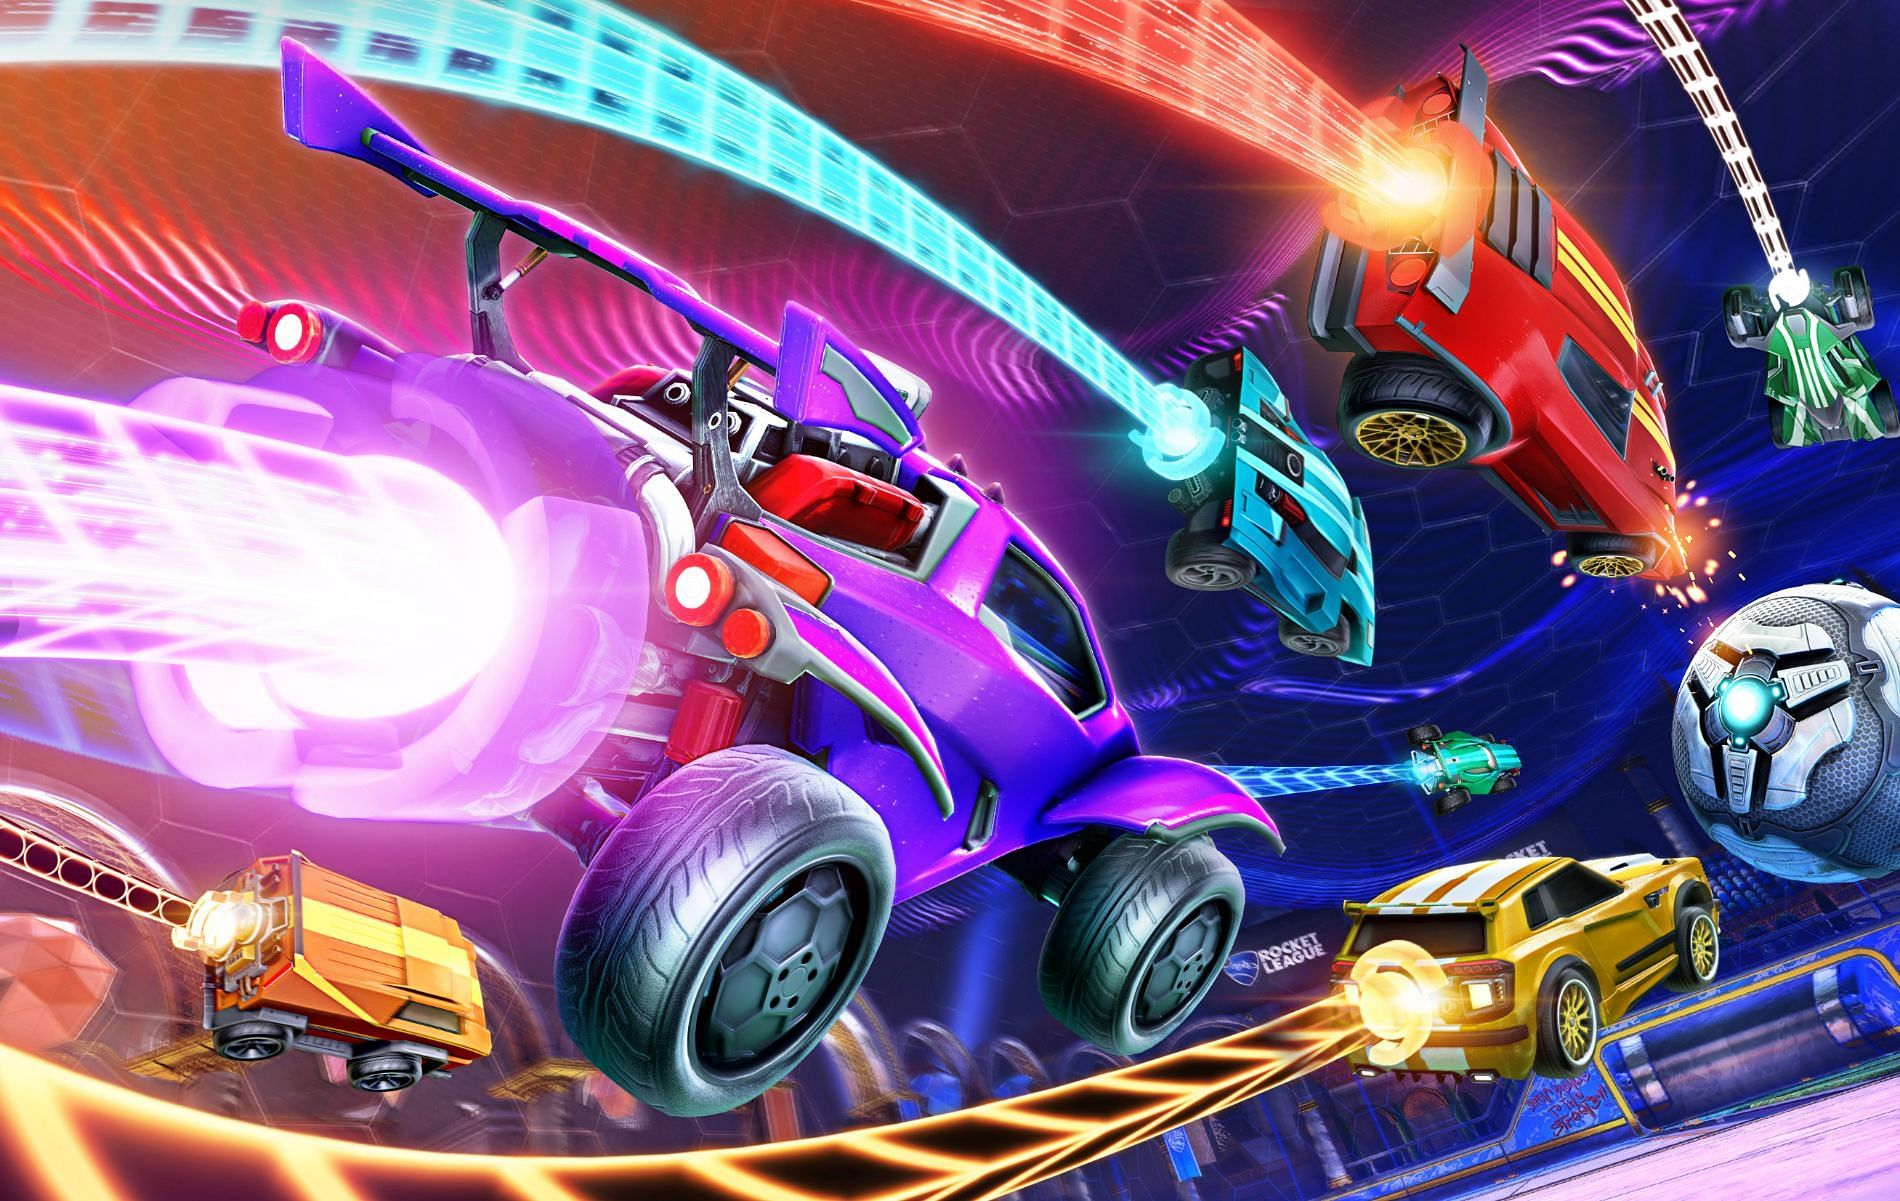 Rocket League Finally Has a Racing Game In Fortnite